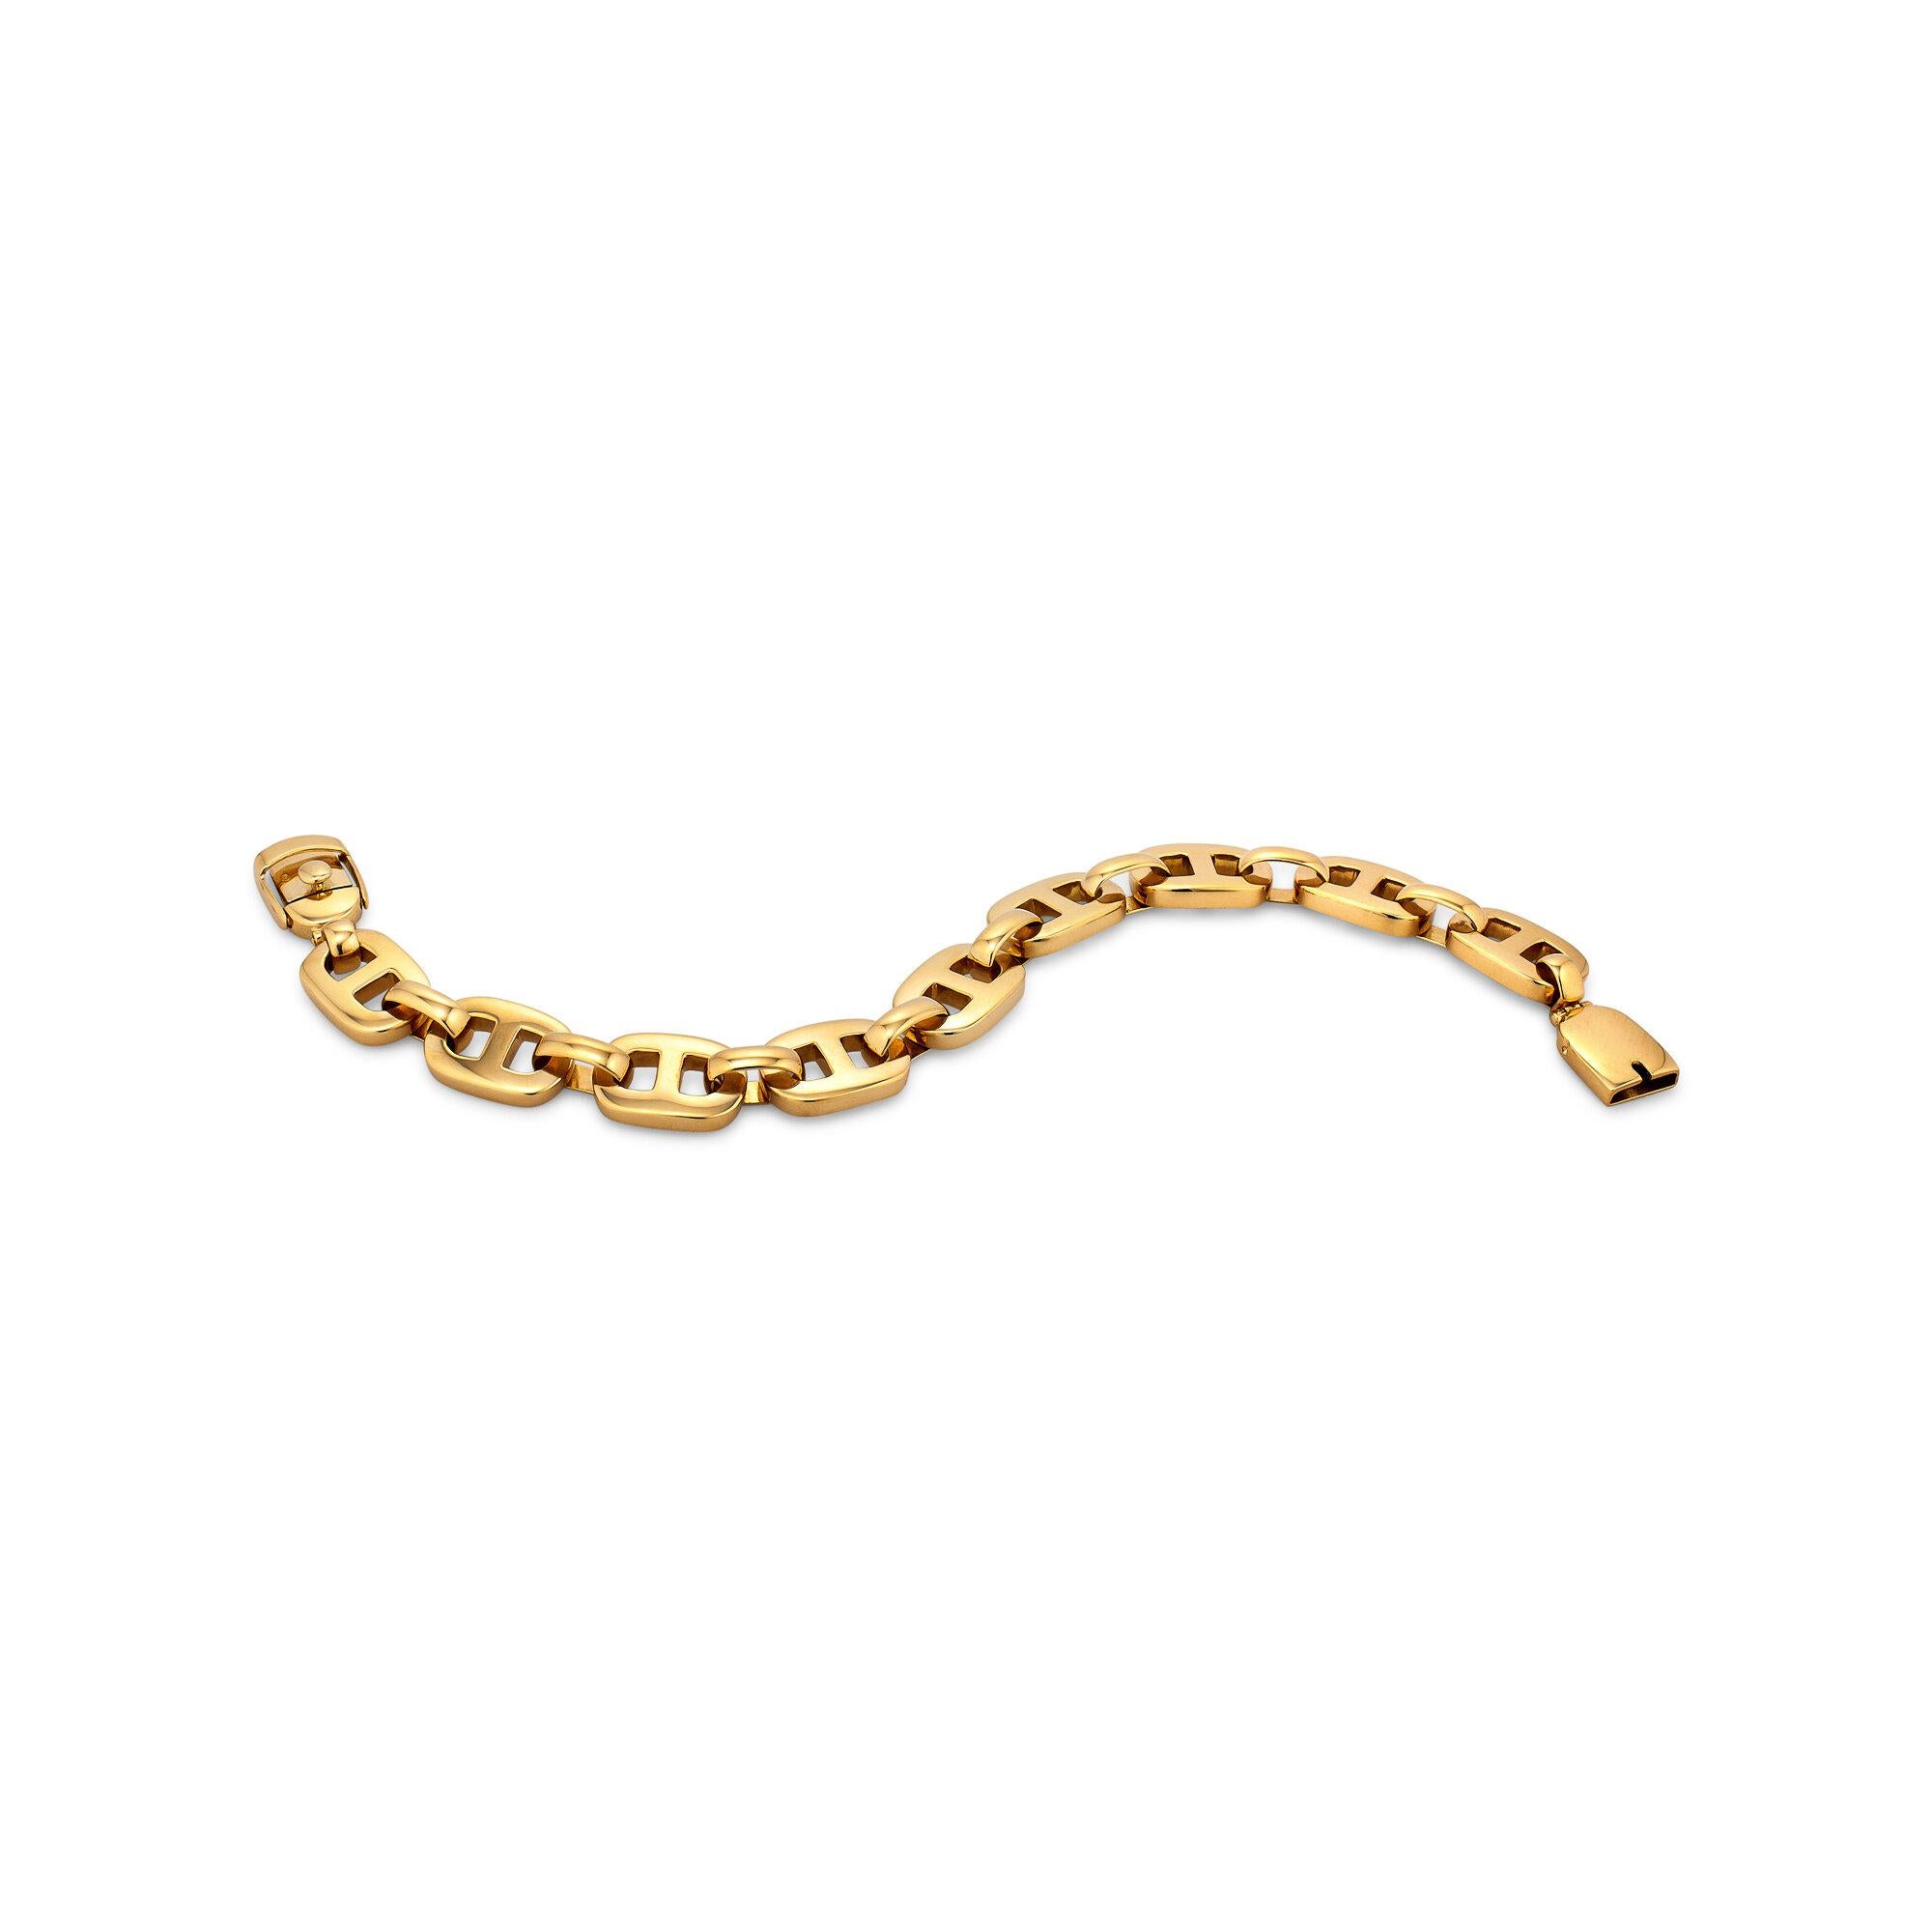 Contemporary Vintage French Gold Anchor Link Bracelet